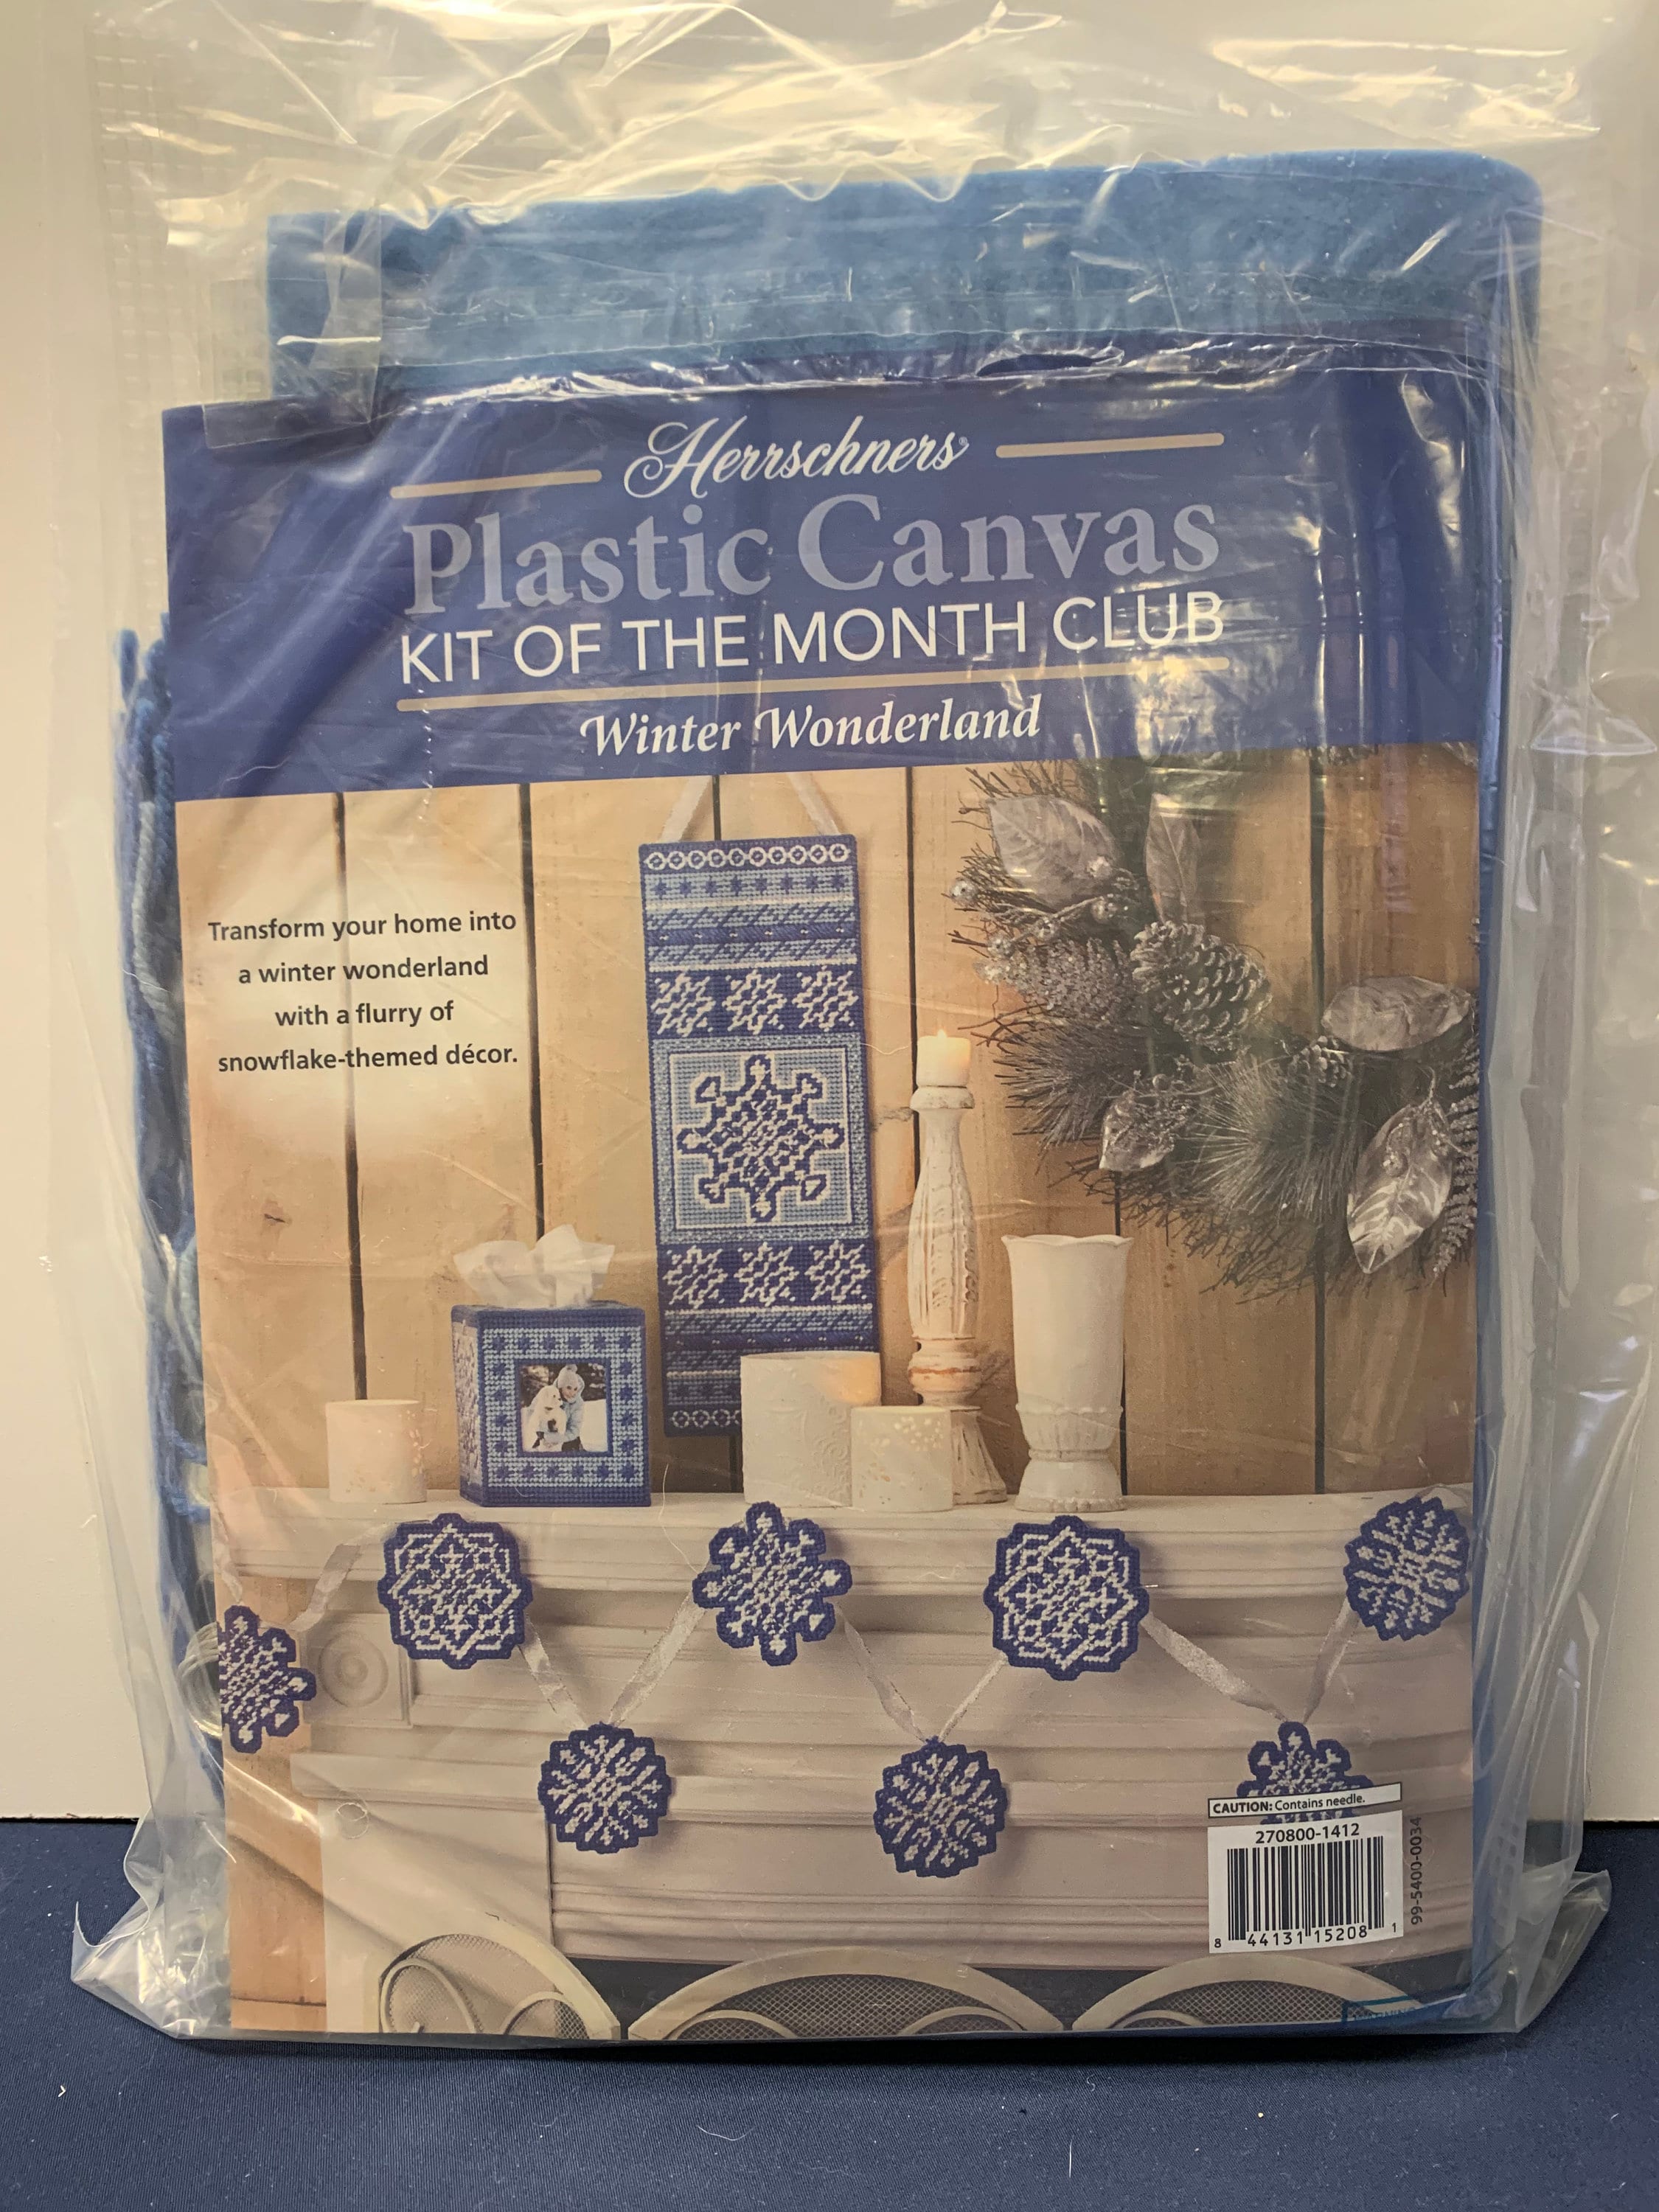 Herrschners Plastic Canvas Kit From Kit of the Month Club winter Wonderland  